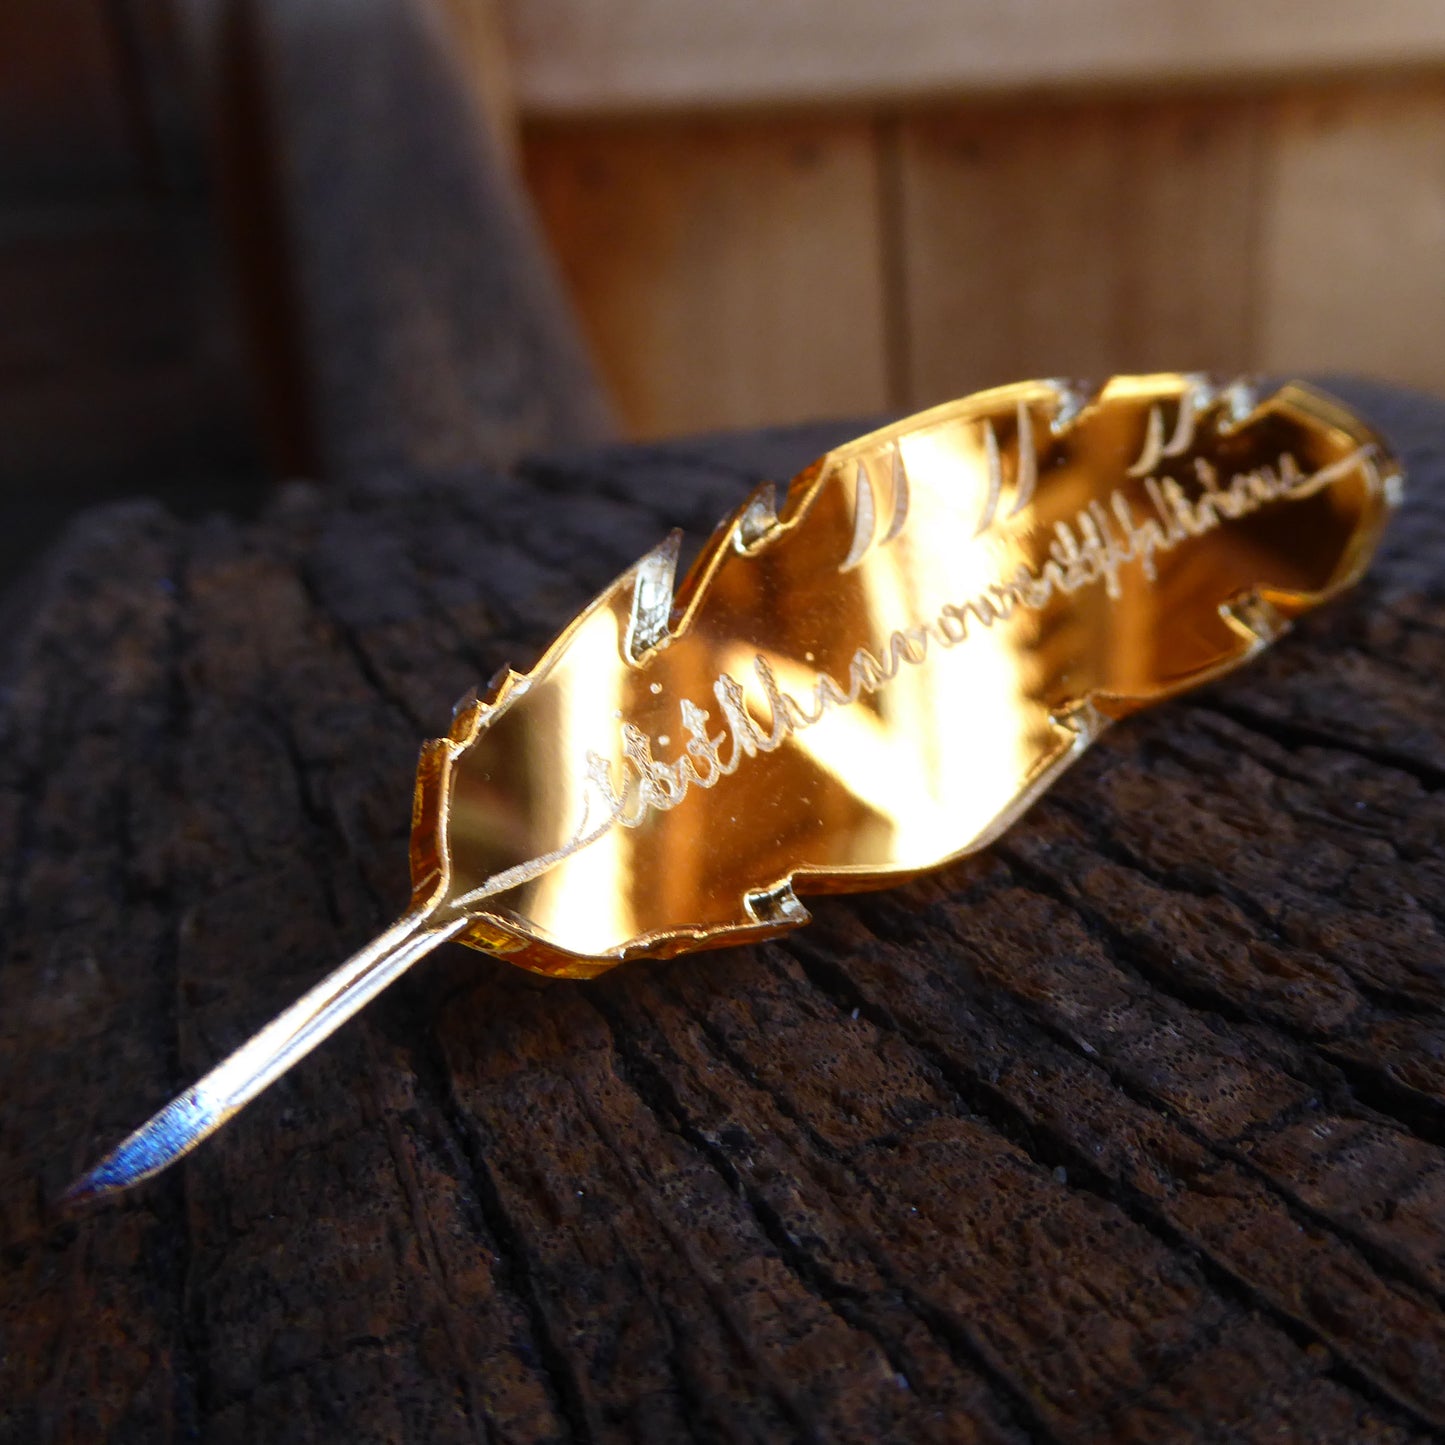 Gold mirrored acrylic brooch in the shape of a feather quill, engraved with a quote from Hamlet